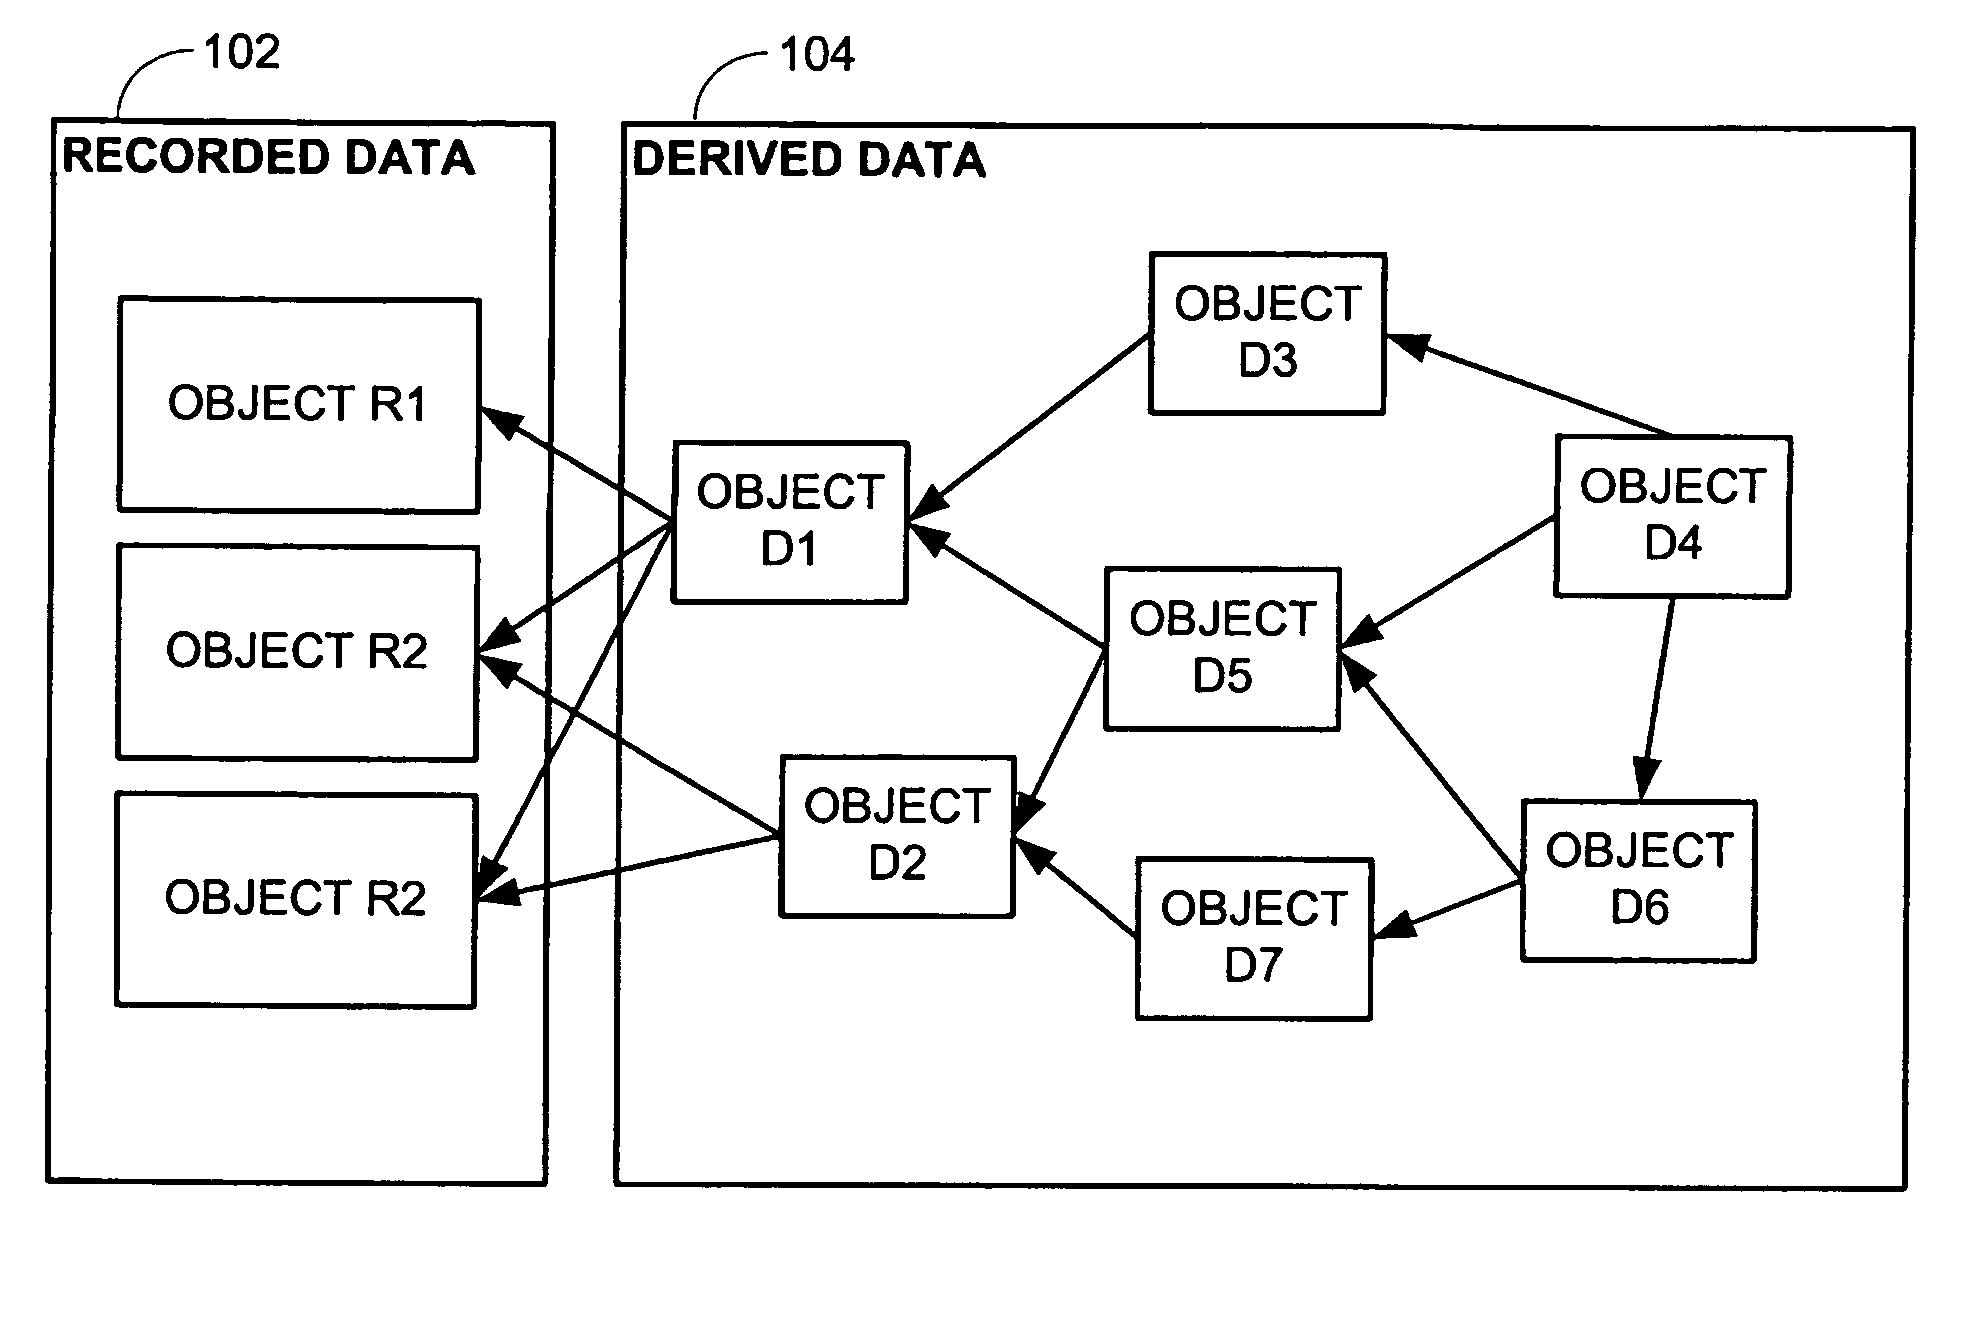 Systems and methods of accessing and updating recorded data via an inter-object proxy